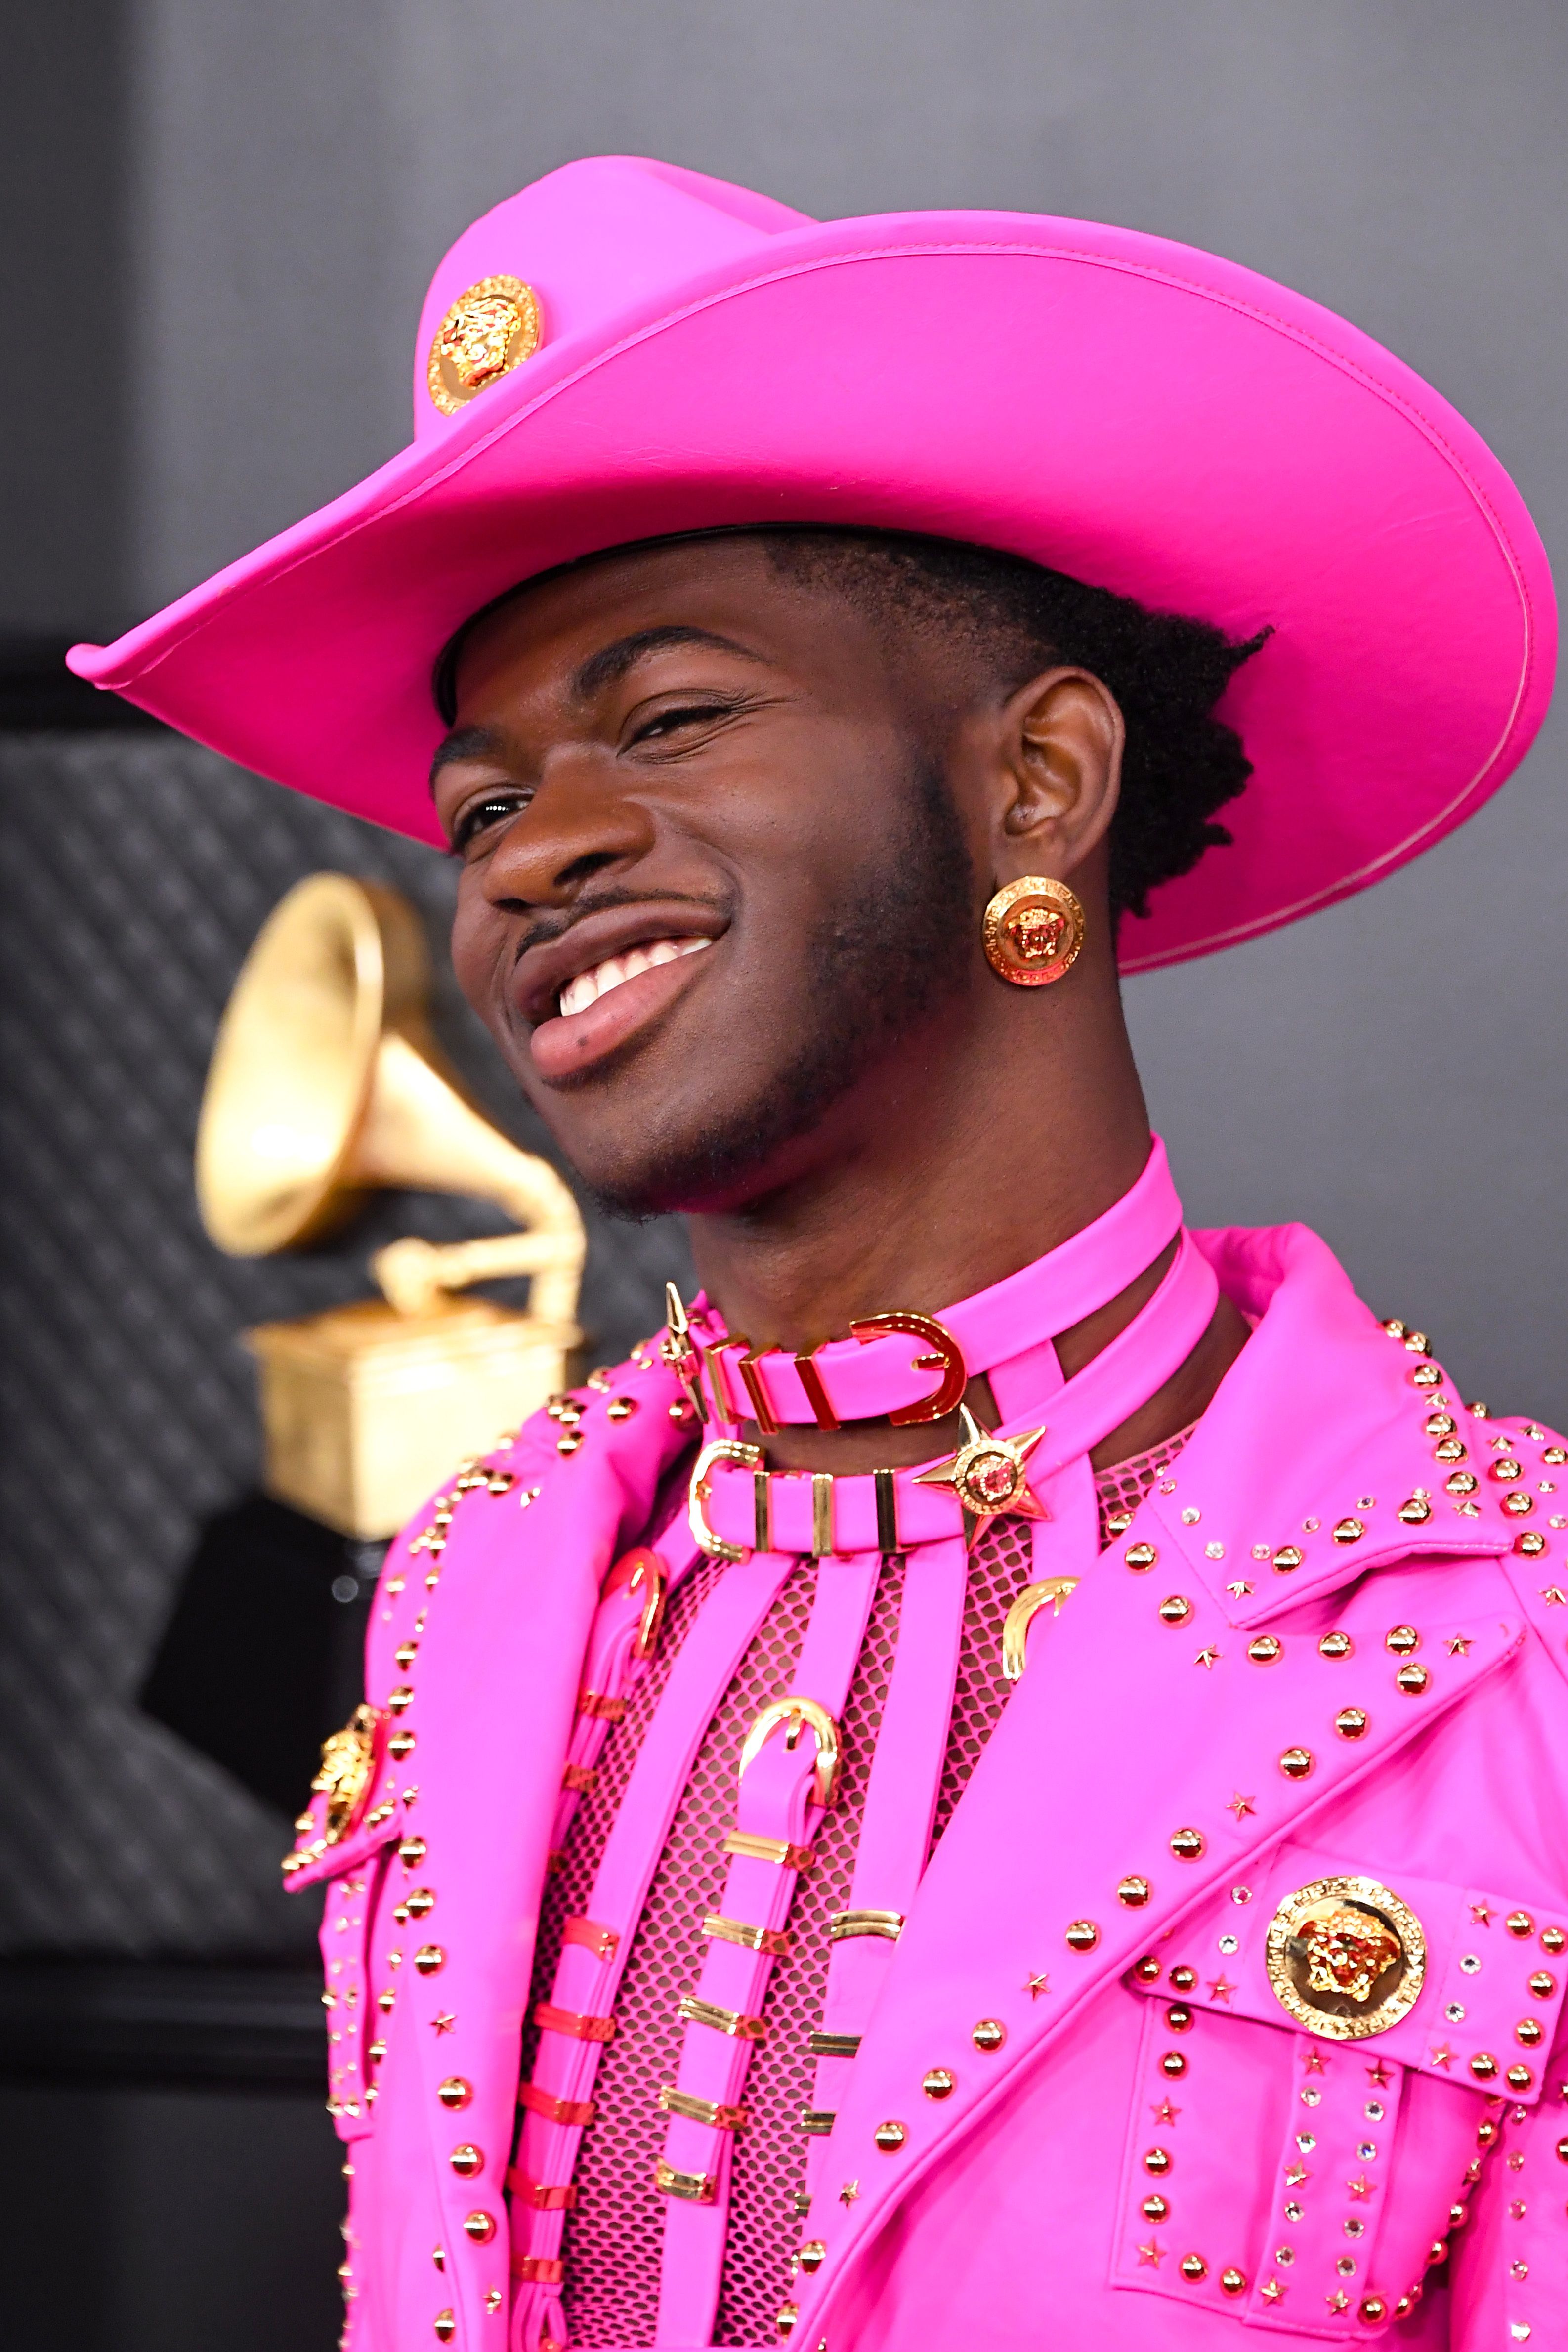 Men Wearing Pink Suits at the Grammys 2020 - Every Dude at the